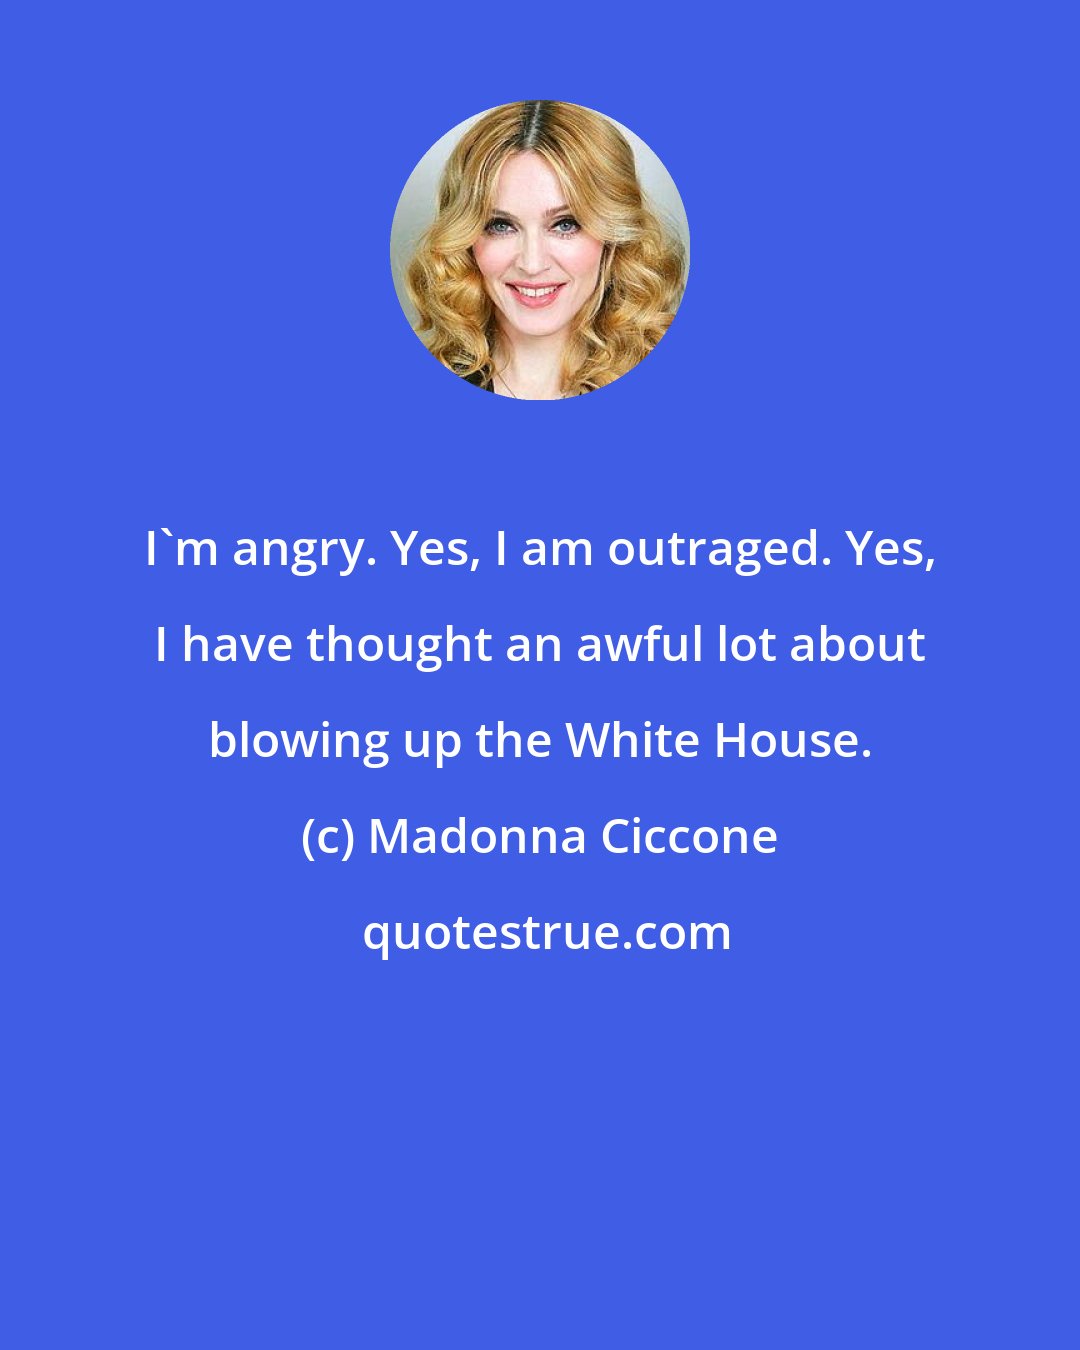 Madonna Ciccone: I'm angry. Yes, I am outraged. Yes, I have thought an awful lot about blowing up the White House.